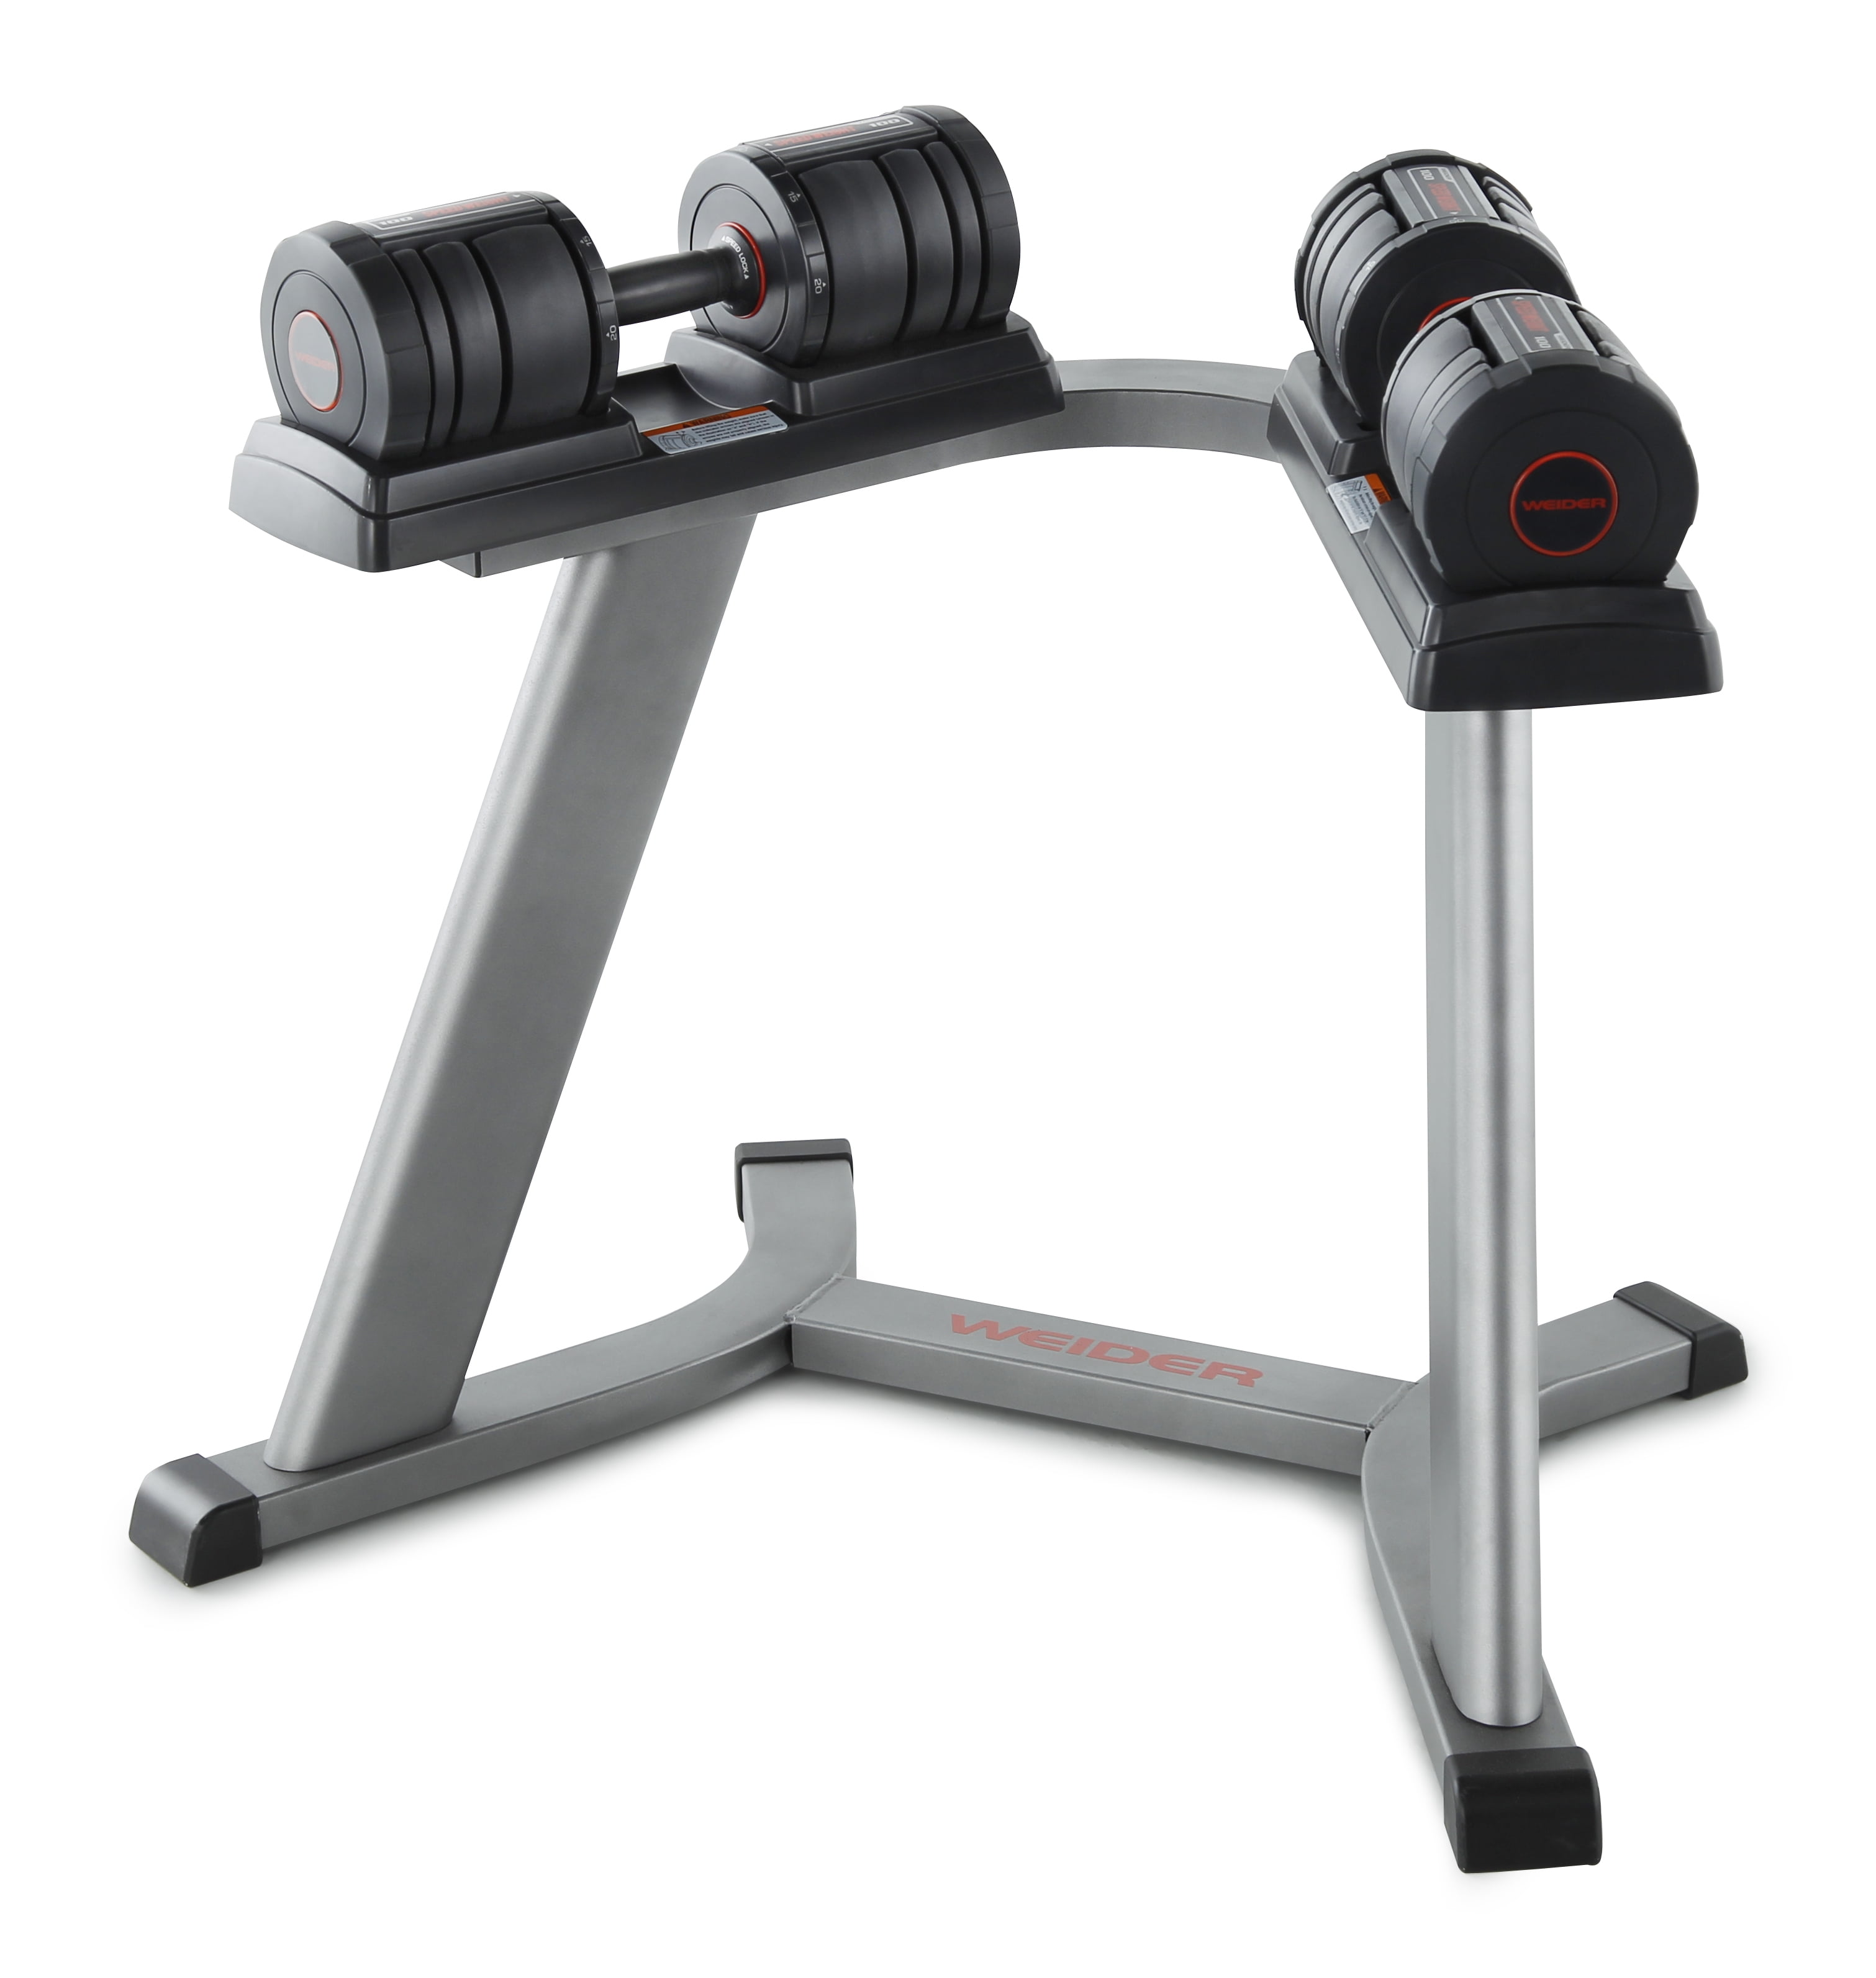 Weider 100lb Select-a-Weight Adjustable Dumbbell Set